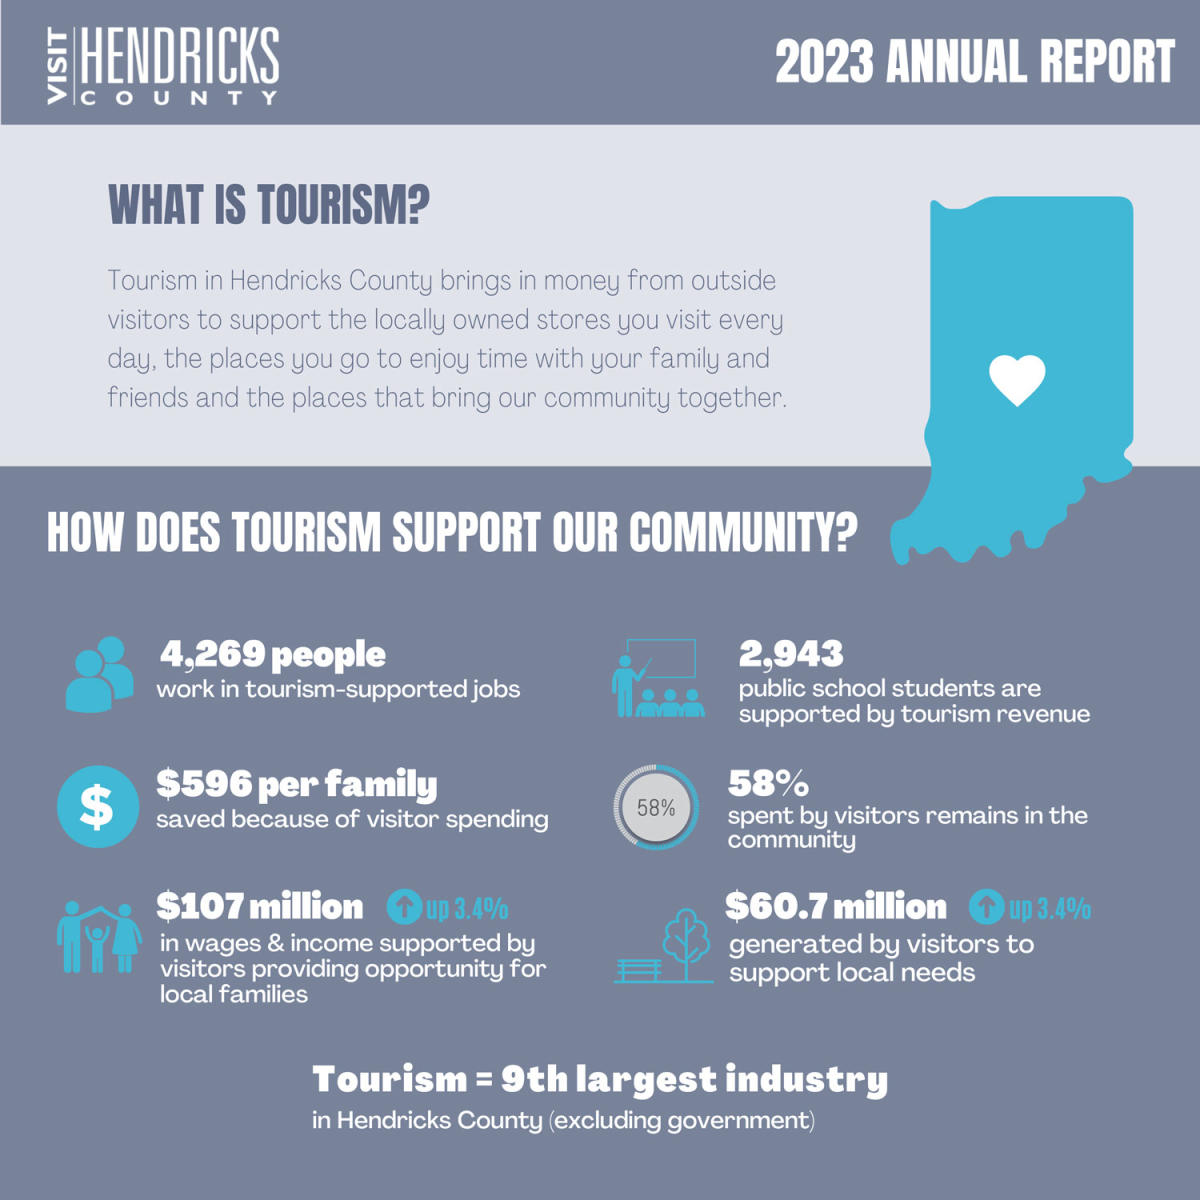 2023 Visit Hendricks County Annual Report - What is Tourism?